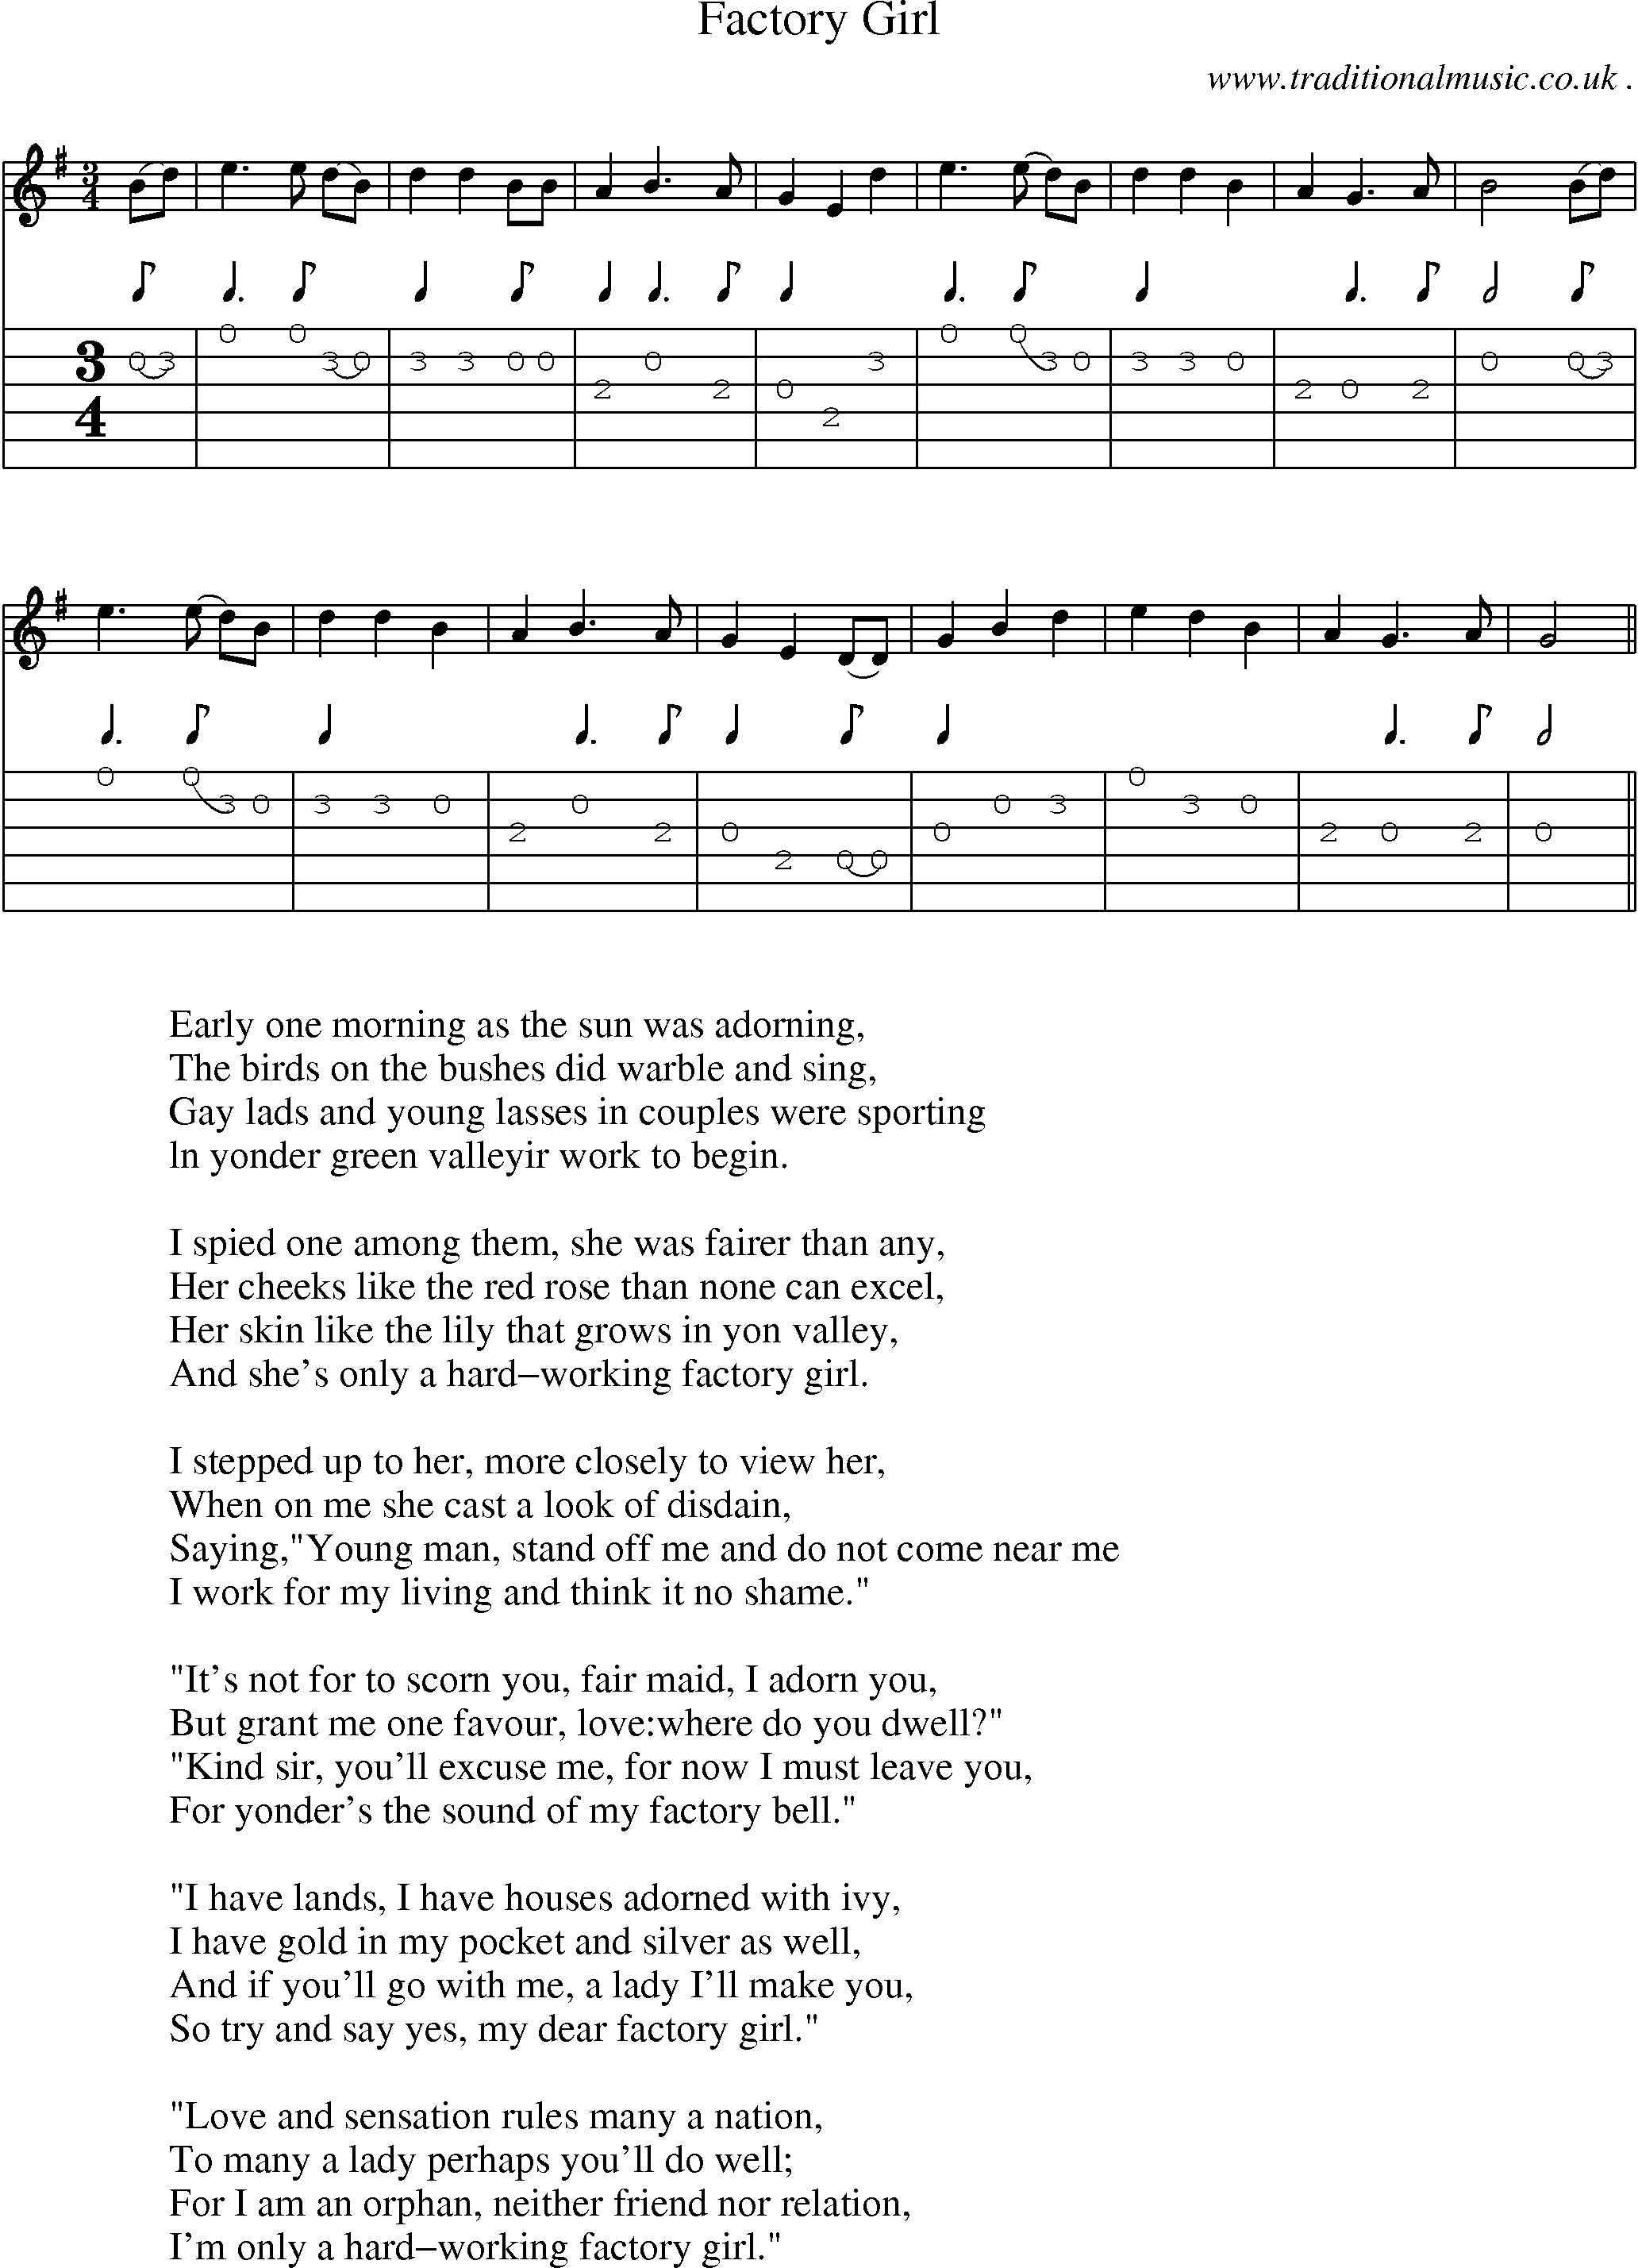 Sheet-Music and Guitar Tabs for Factory Girl